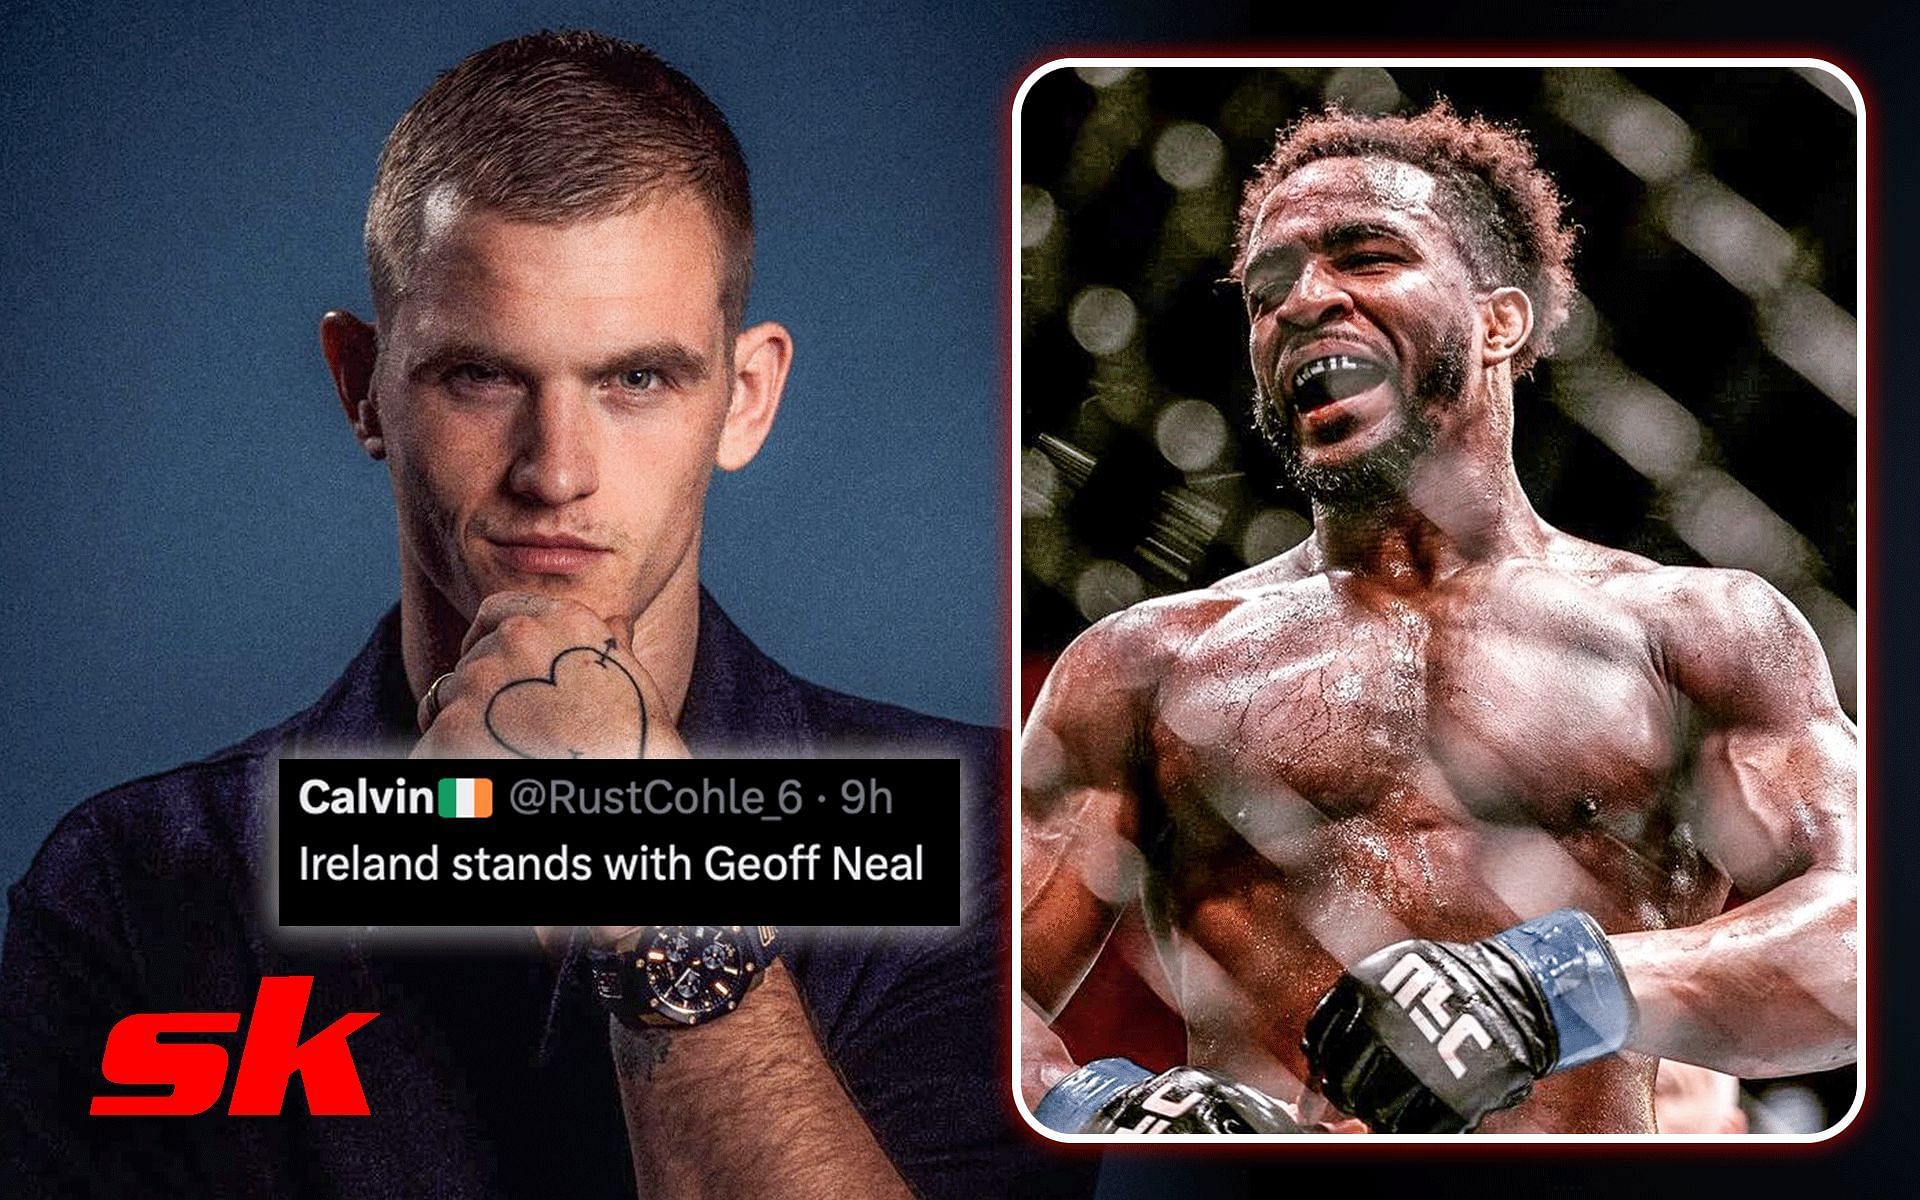 Fans react to Ian Garry (left) mocking Geoff Neal (right) in a promo video [Image via: @iangarry and @handzofsteelmma on Instagram]